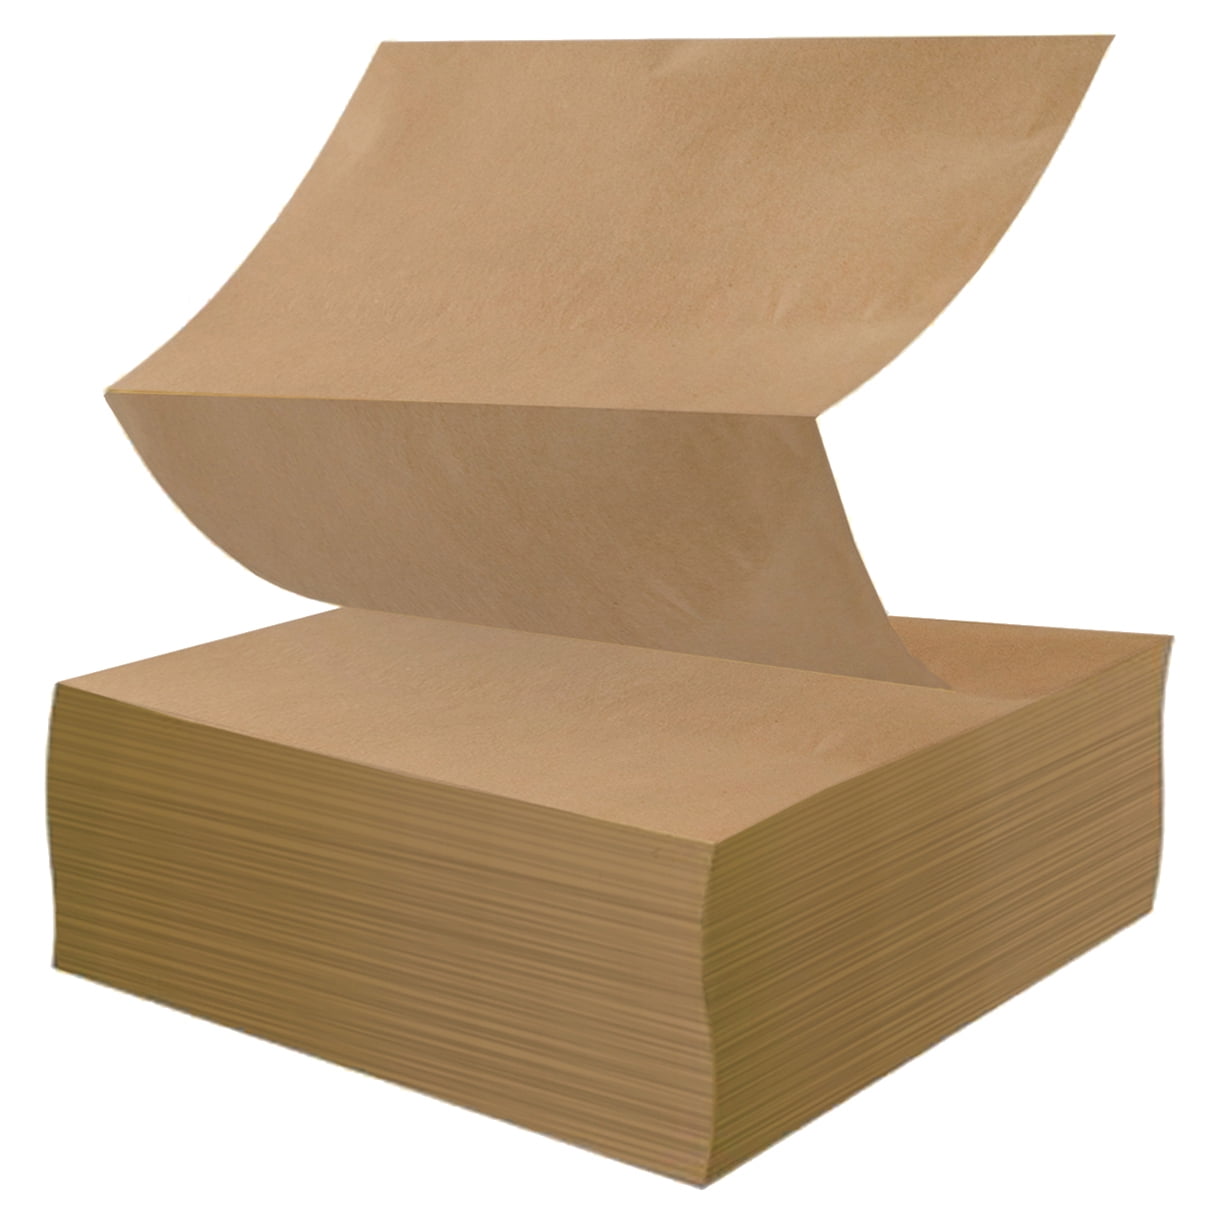 Pacon® Corobuff® Corrugated Paper Roll - Pacon 0011011 RL - Betty